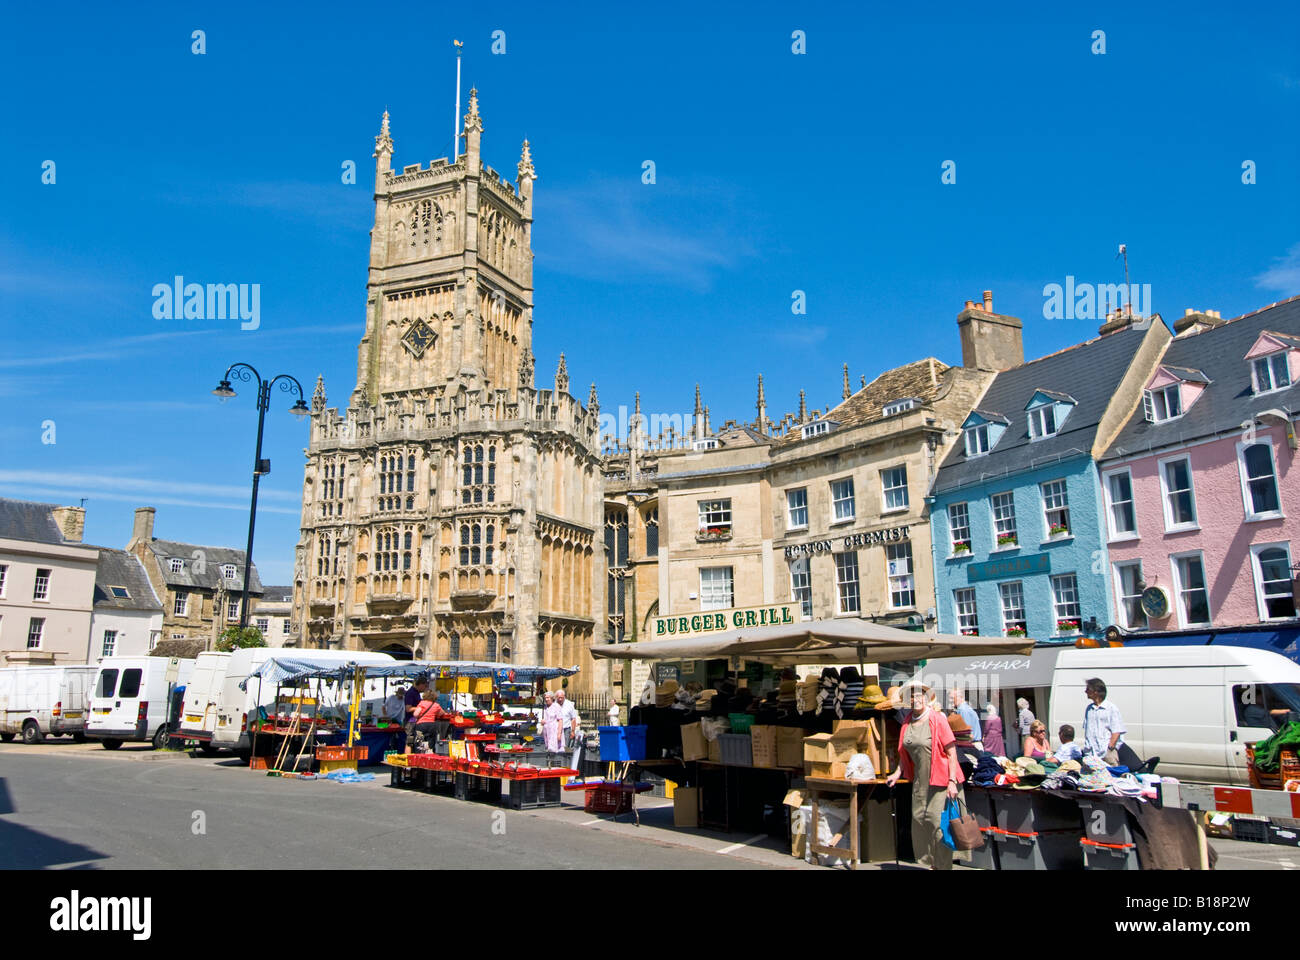 Market day in Cirencester, Gloucestershire, England Stock Photo